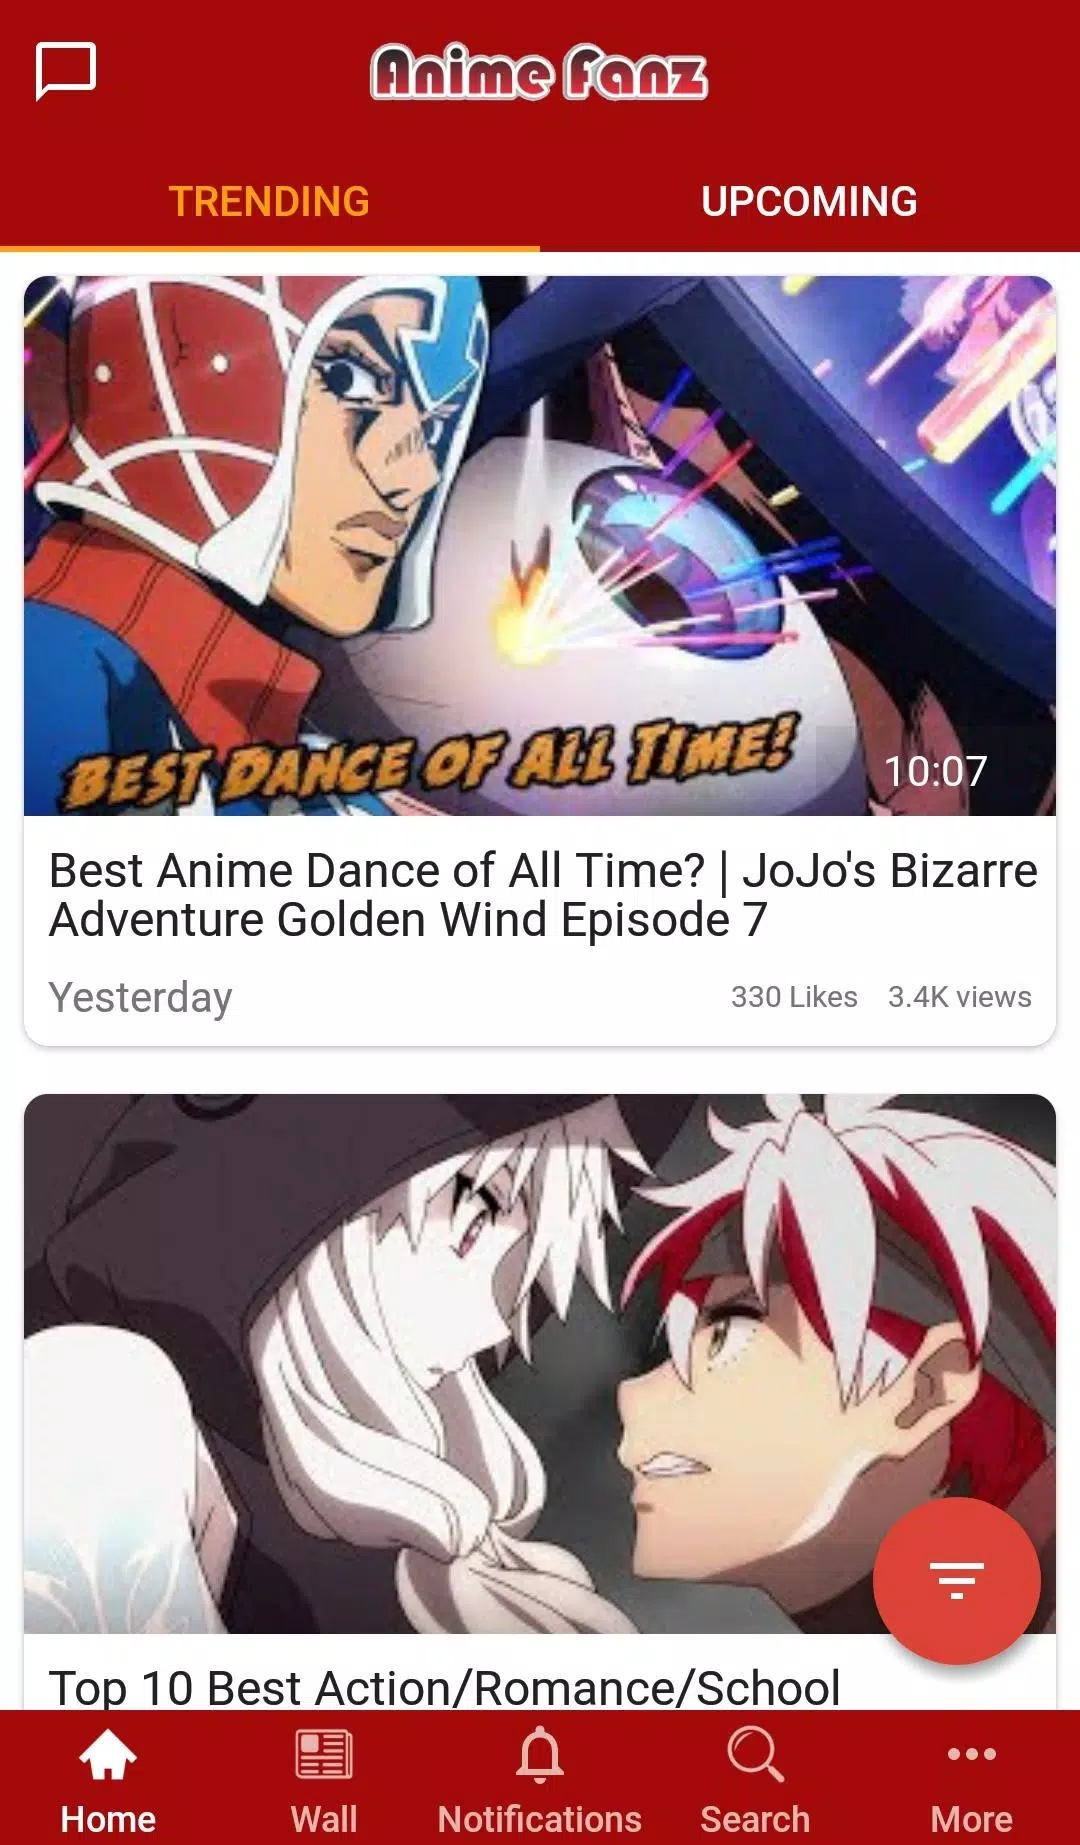 Anime Fanz Tube - Anime Stack APK (Android App) - Free Download